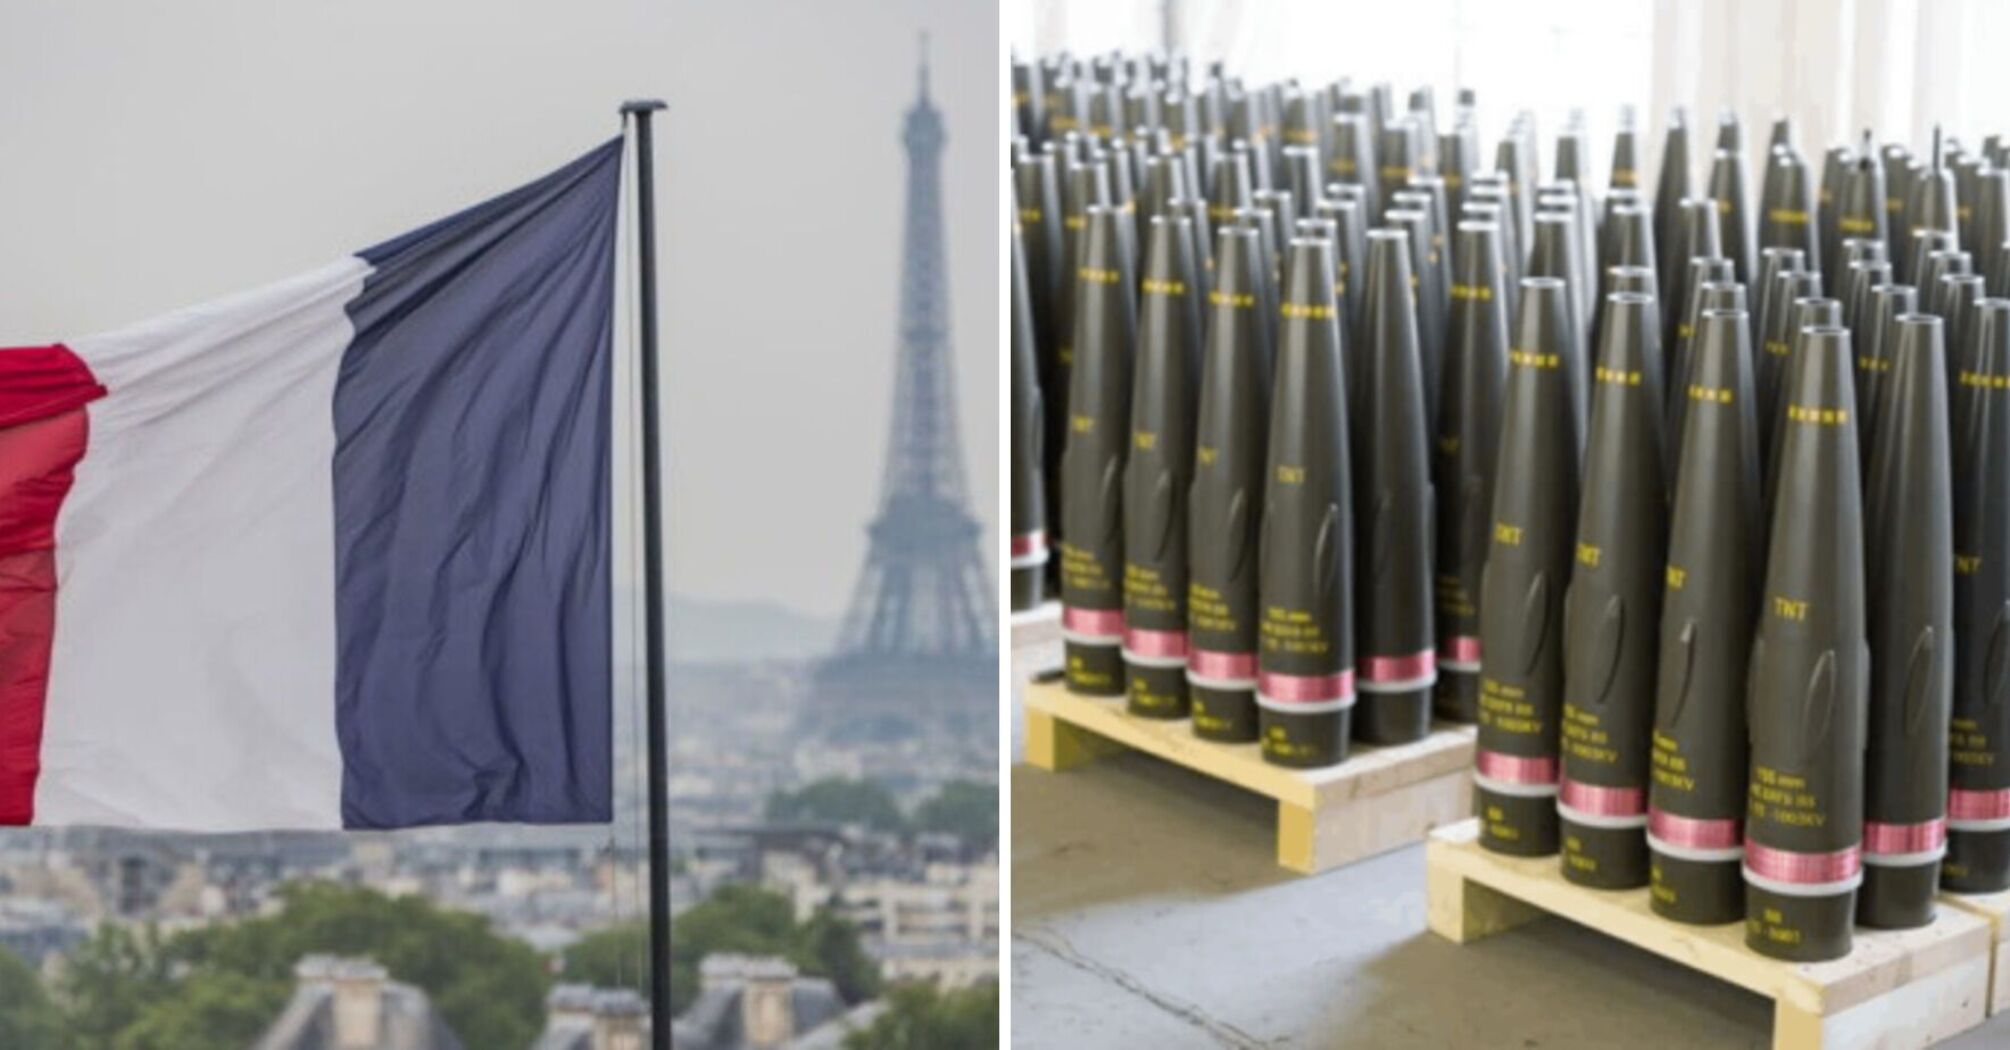 France plans to quadruple production of mortar shells: when will it happen